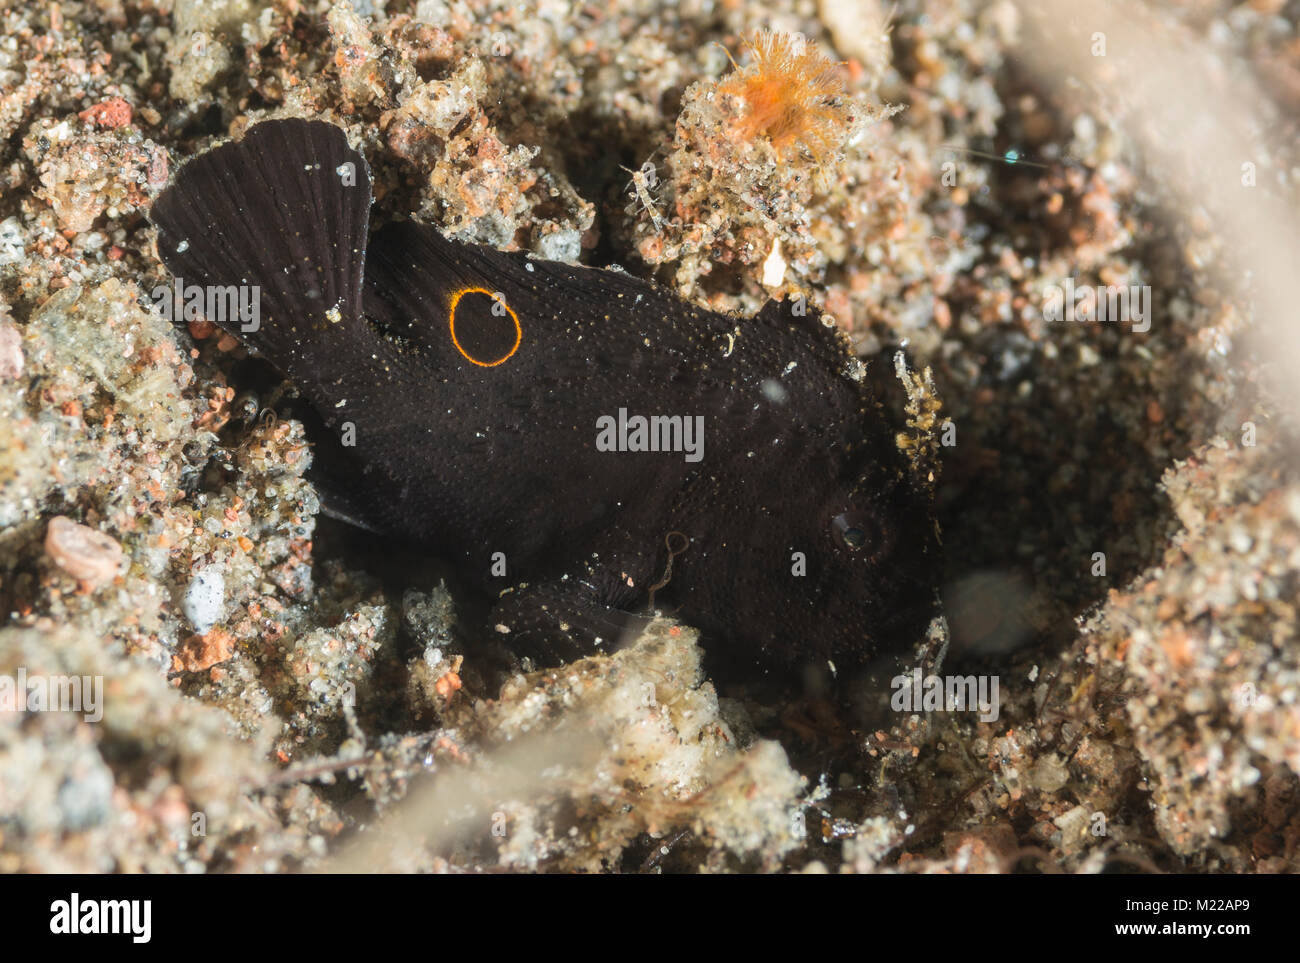 Juvenile ocellated frogfish on the sea floor Stock Photo